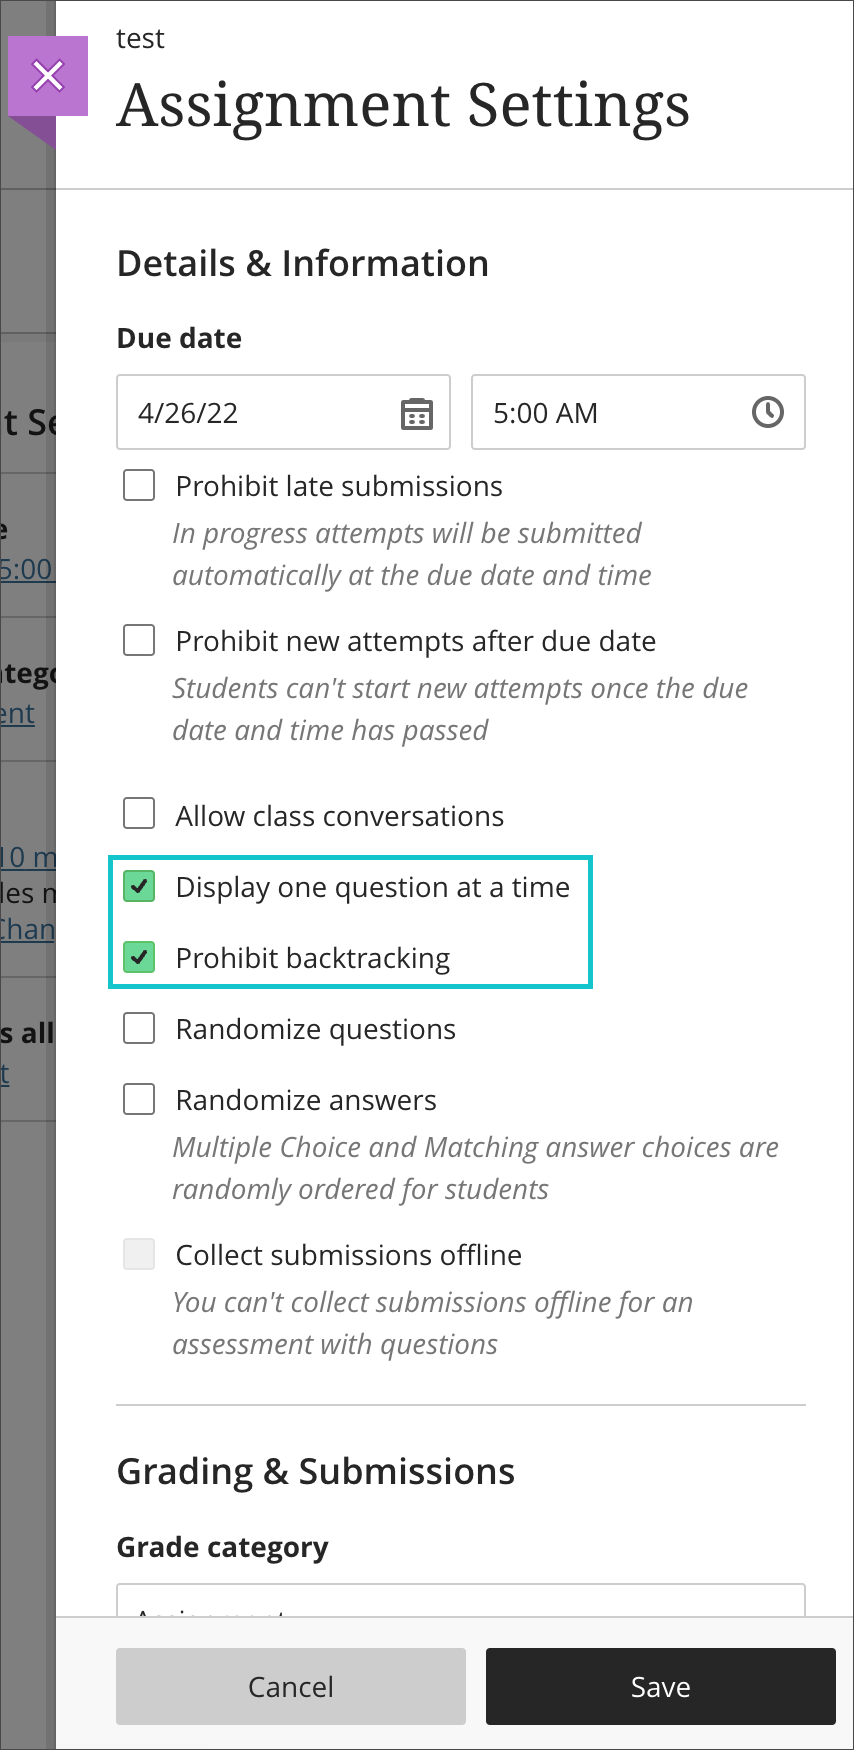 The boxes for display one question at a time and prohibited backtracking in assignment settings are ticked and highlighted. 